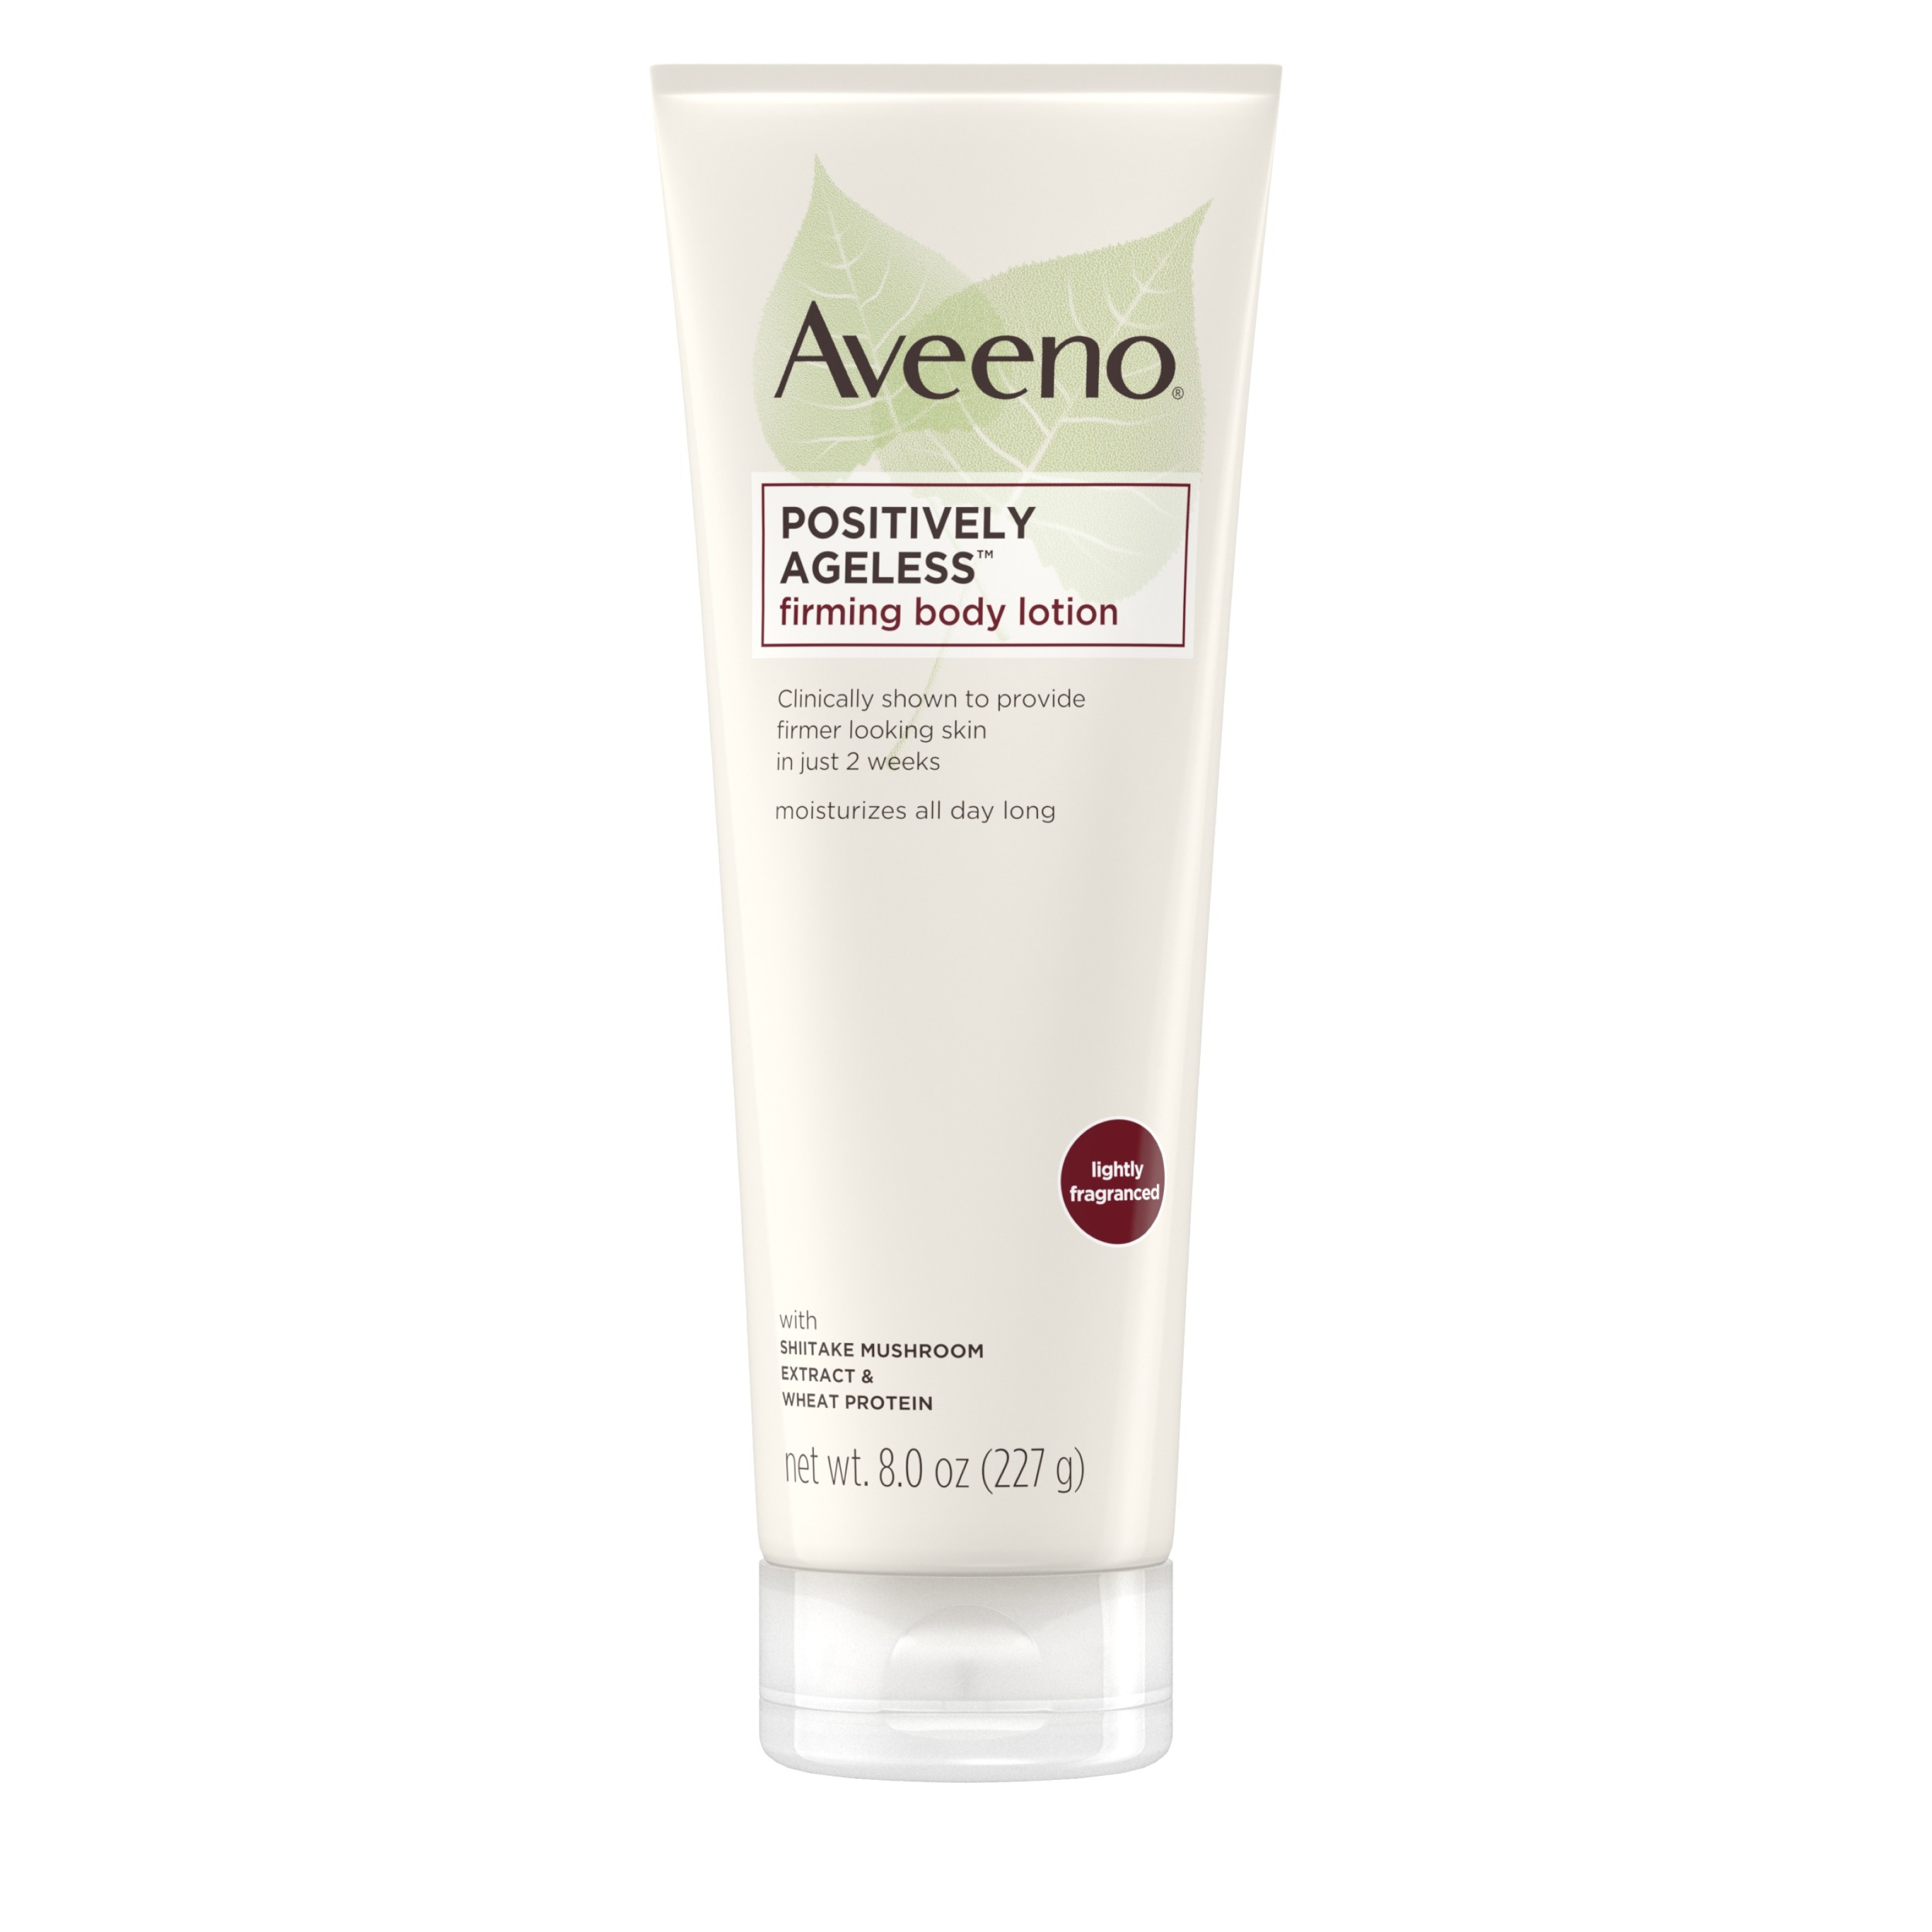 Aveeno Positively Ageless Anti-Aging Firming Body Lotion, 8 oz - image 2 of 7